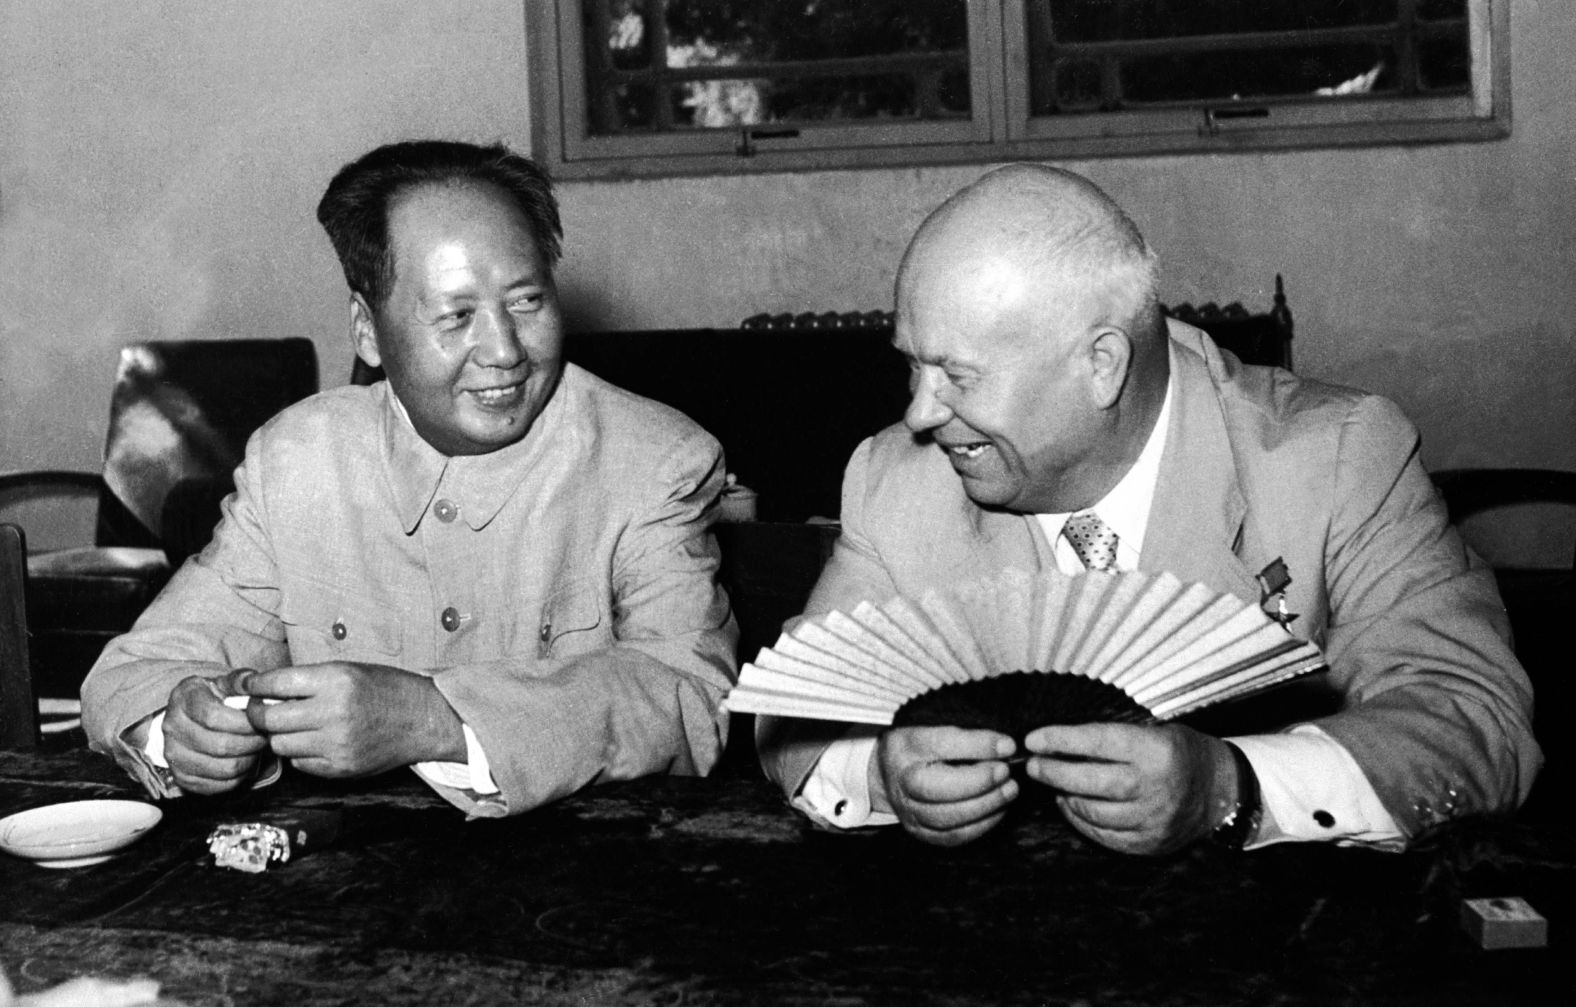 Mao meets Soviet leader Nikita Khrushchev in Beijing in August 1958. Despite China and the Soviet Union both being communist nations, their leaders didn't see eye to eye on the future of communism — in particular, Mao disagreed with Khrushchev's policies of peaceful coexistence with the West. Relations would soon sour between the two nations, with public denunciations in 1960.